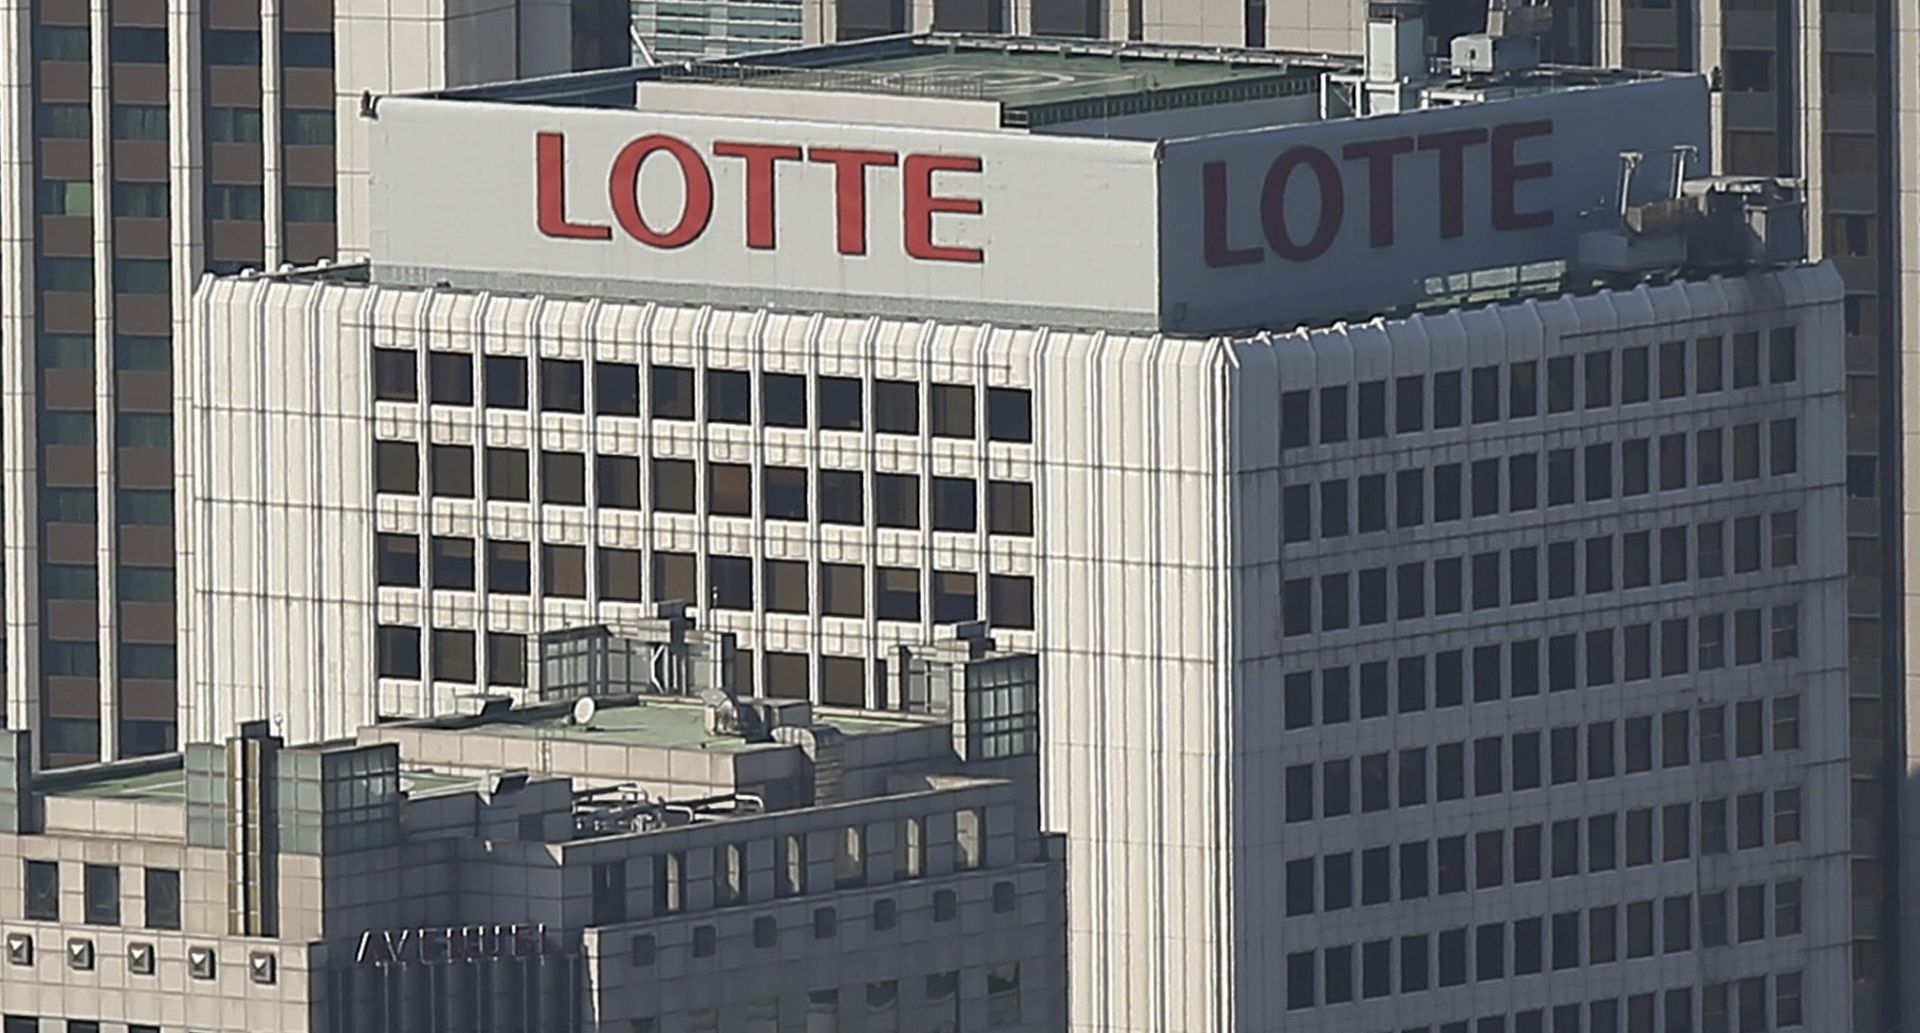 epa05824235 (FILE) - A view of the headquarters' building of South Korean retail giant Lotte Group in Seoul, South Korea, 14 October 2015 (reissued 02 March 2017). According to media reports, the Lotte Group announced on 02 March that its Lotte Online Duty Free websites and mobile apps in Korean, Chinese, Japanese and English were hacked and inaccessible, following an initial hack on the Chinese version of it's website on 01 March.  EPA/YONHAP SOUTH KOREA OUT